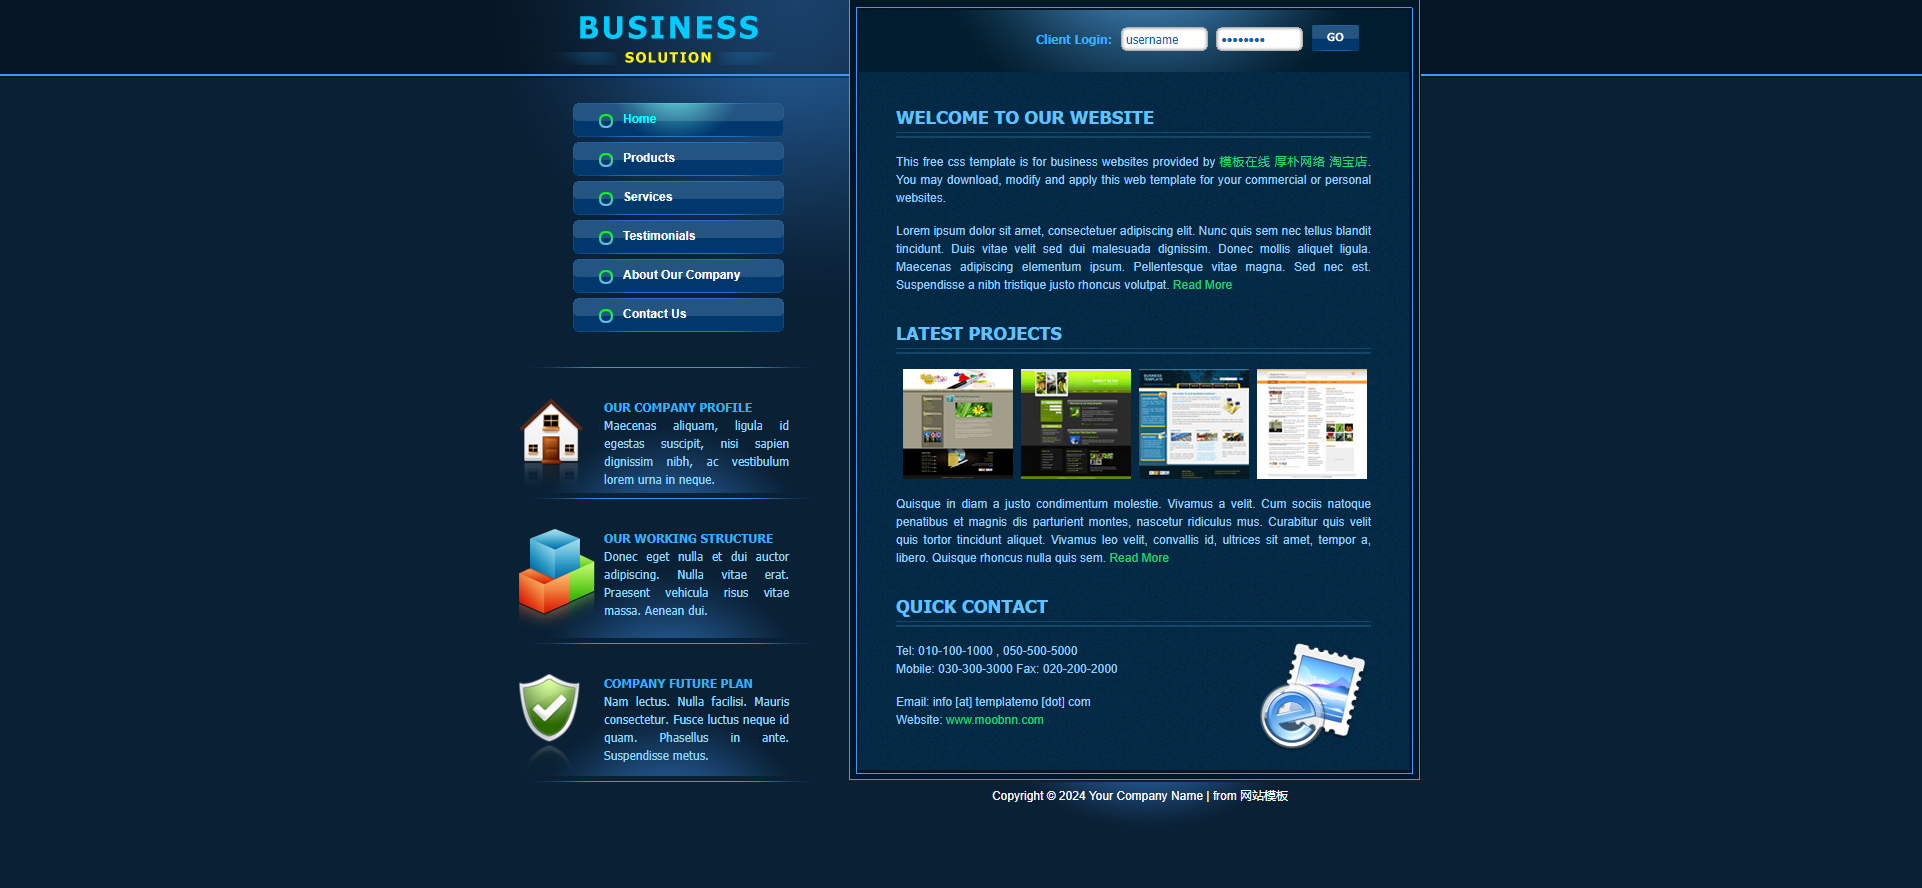 Business Solution Template, Free Web Template, Web.png